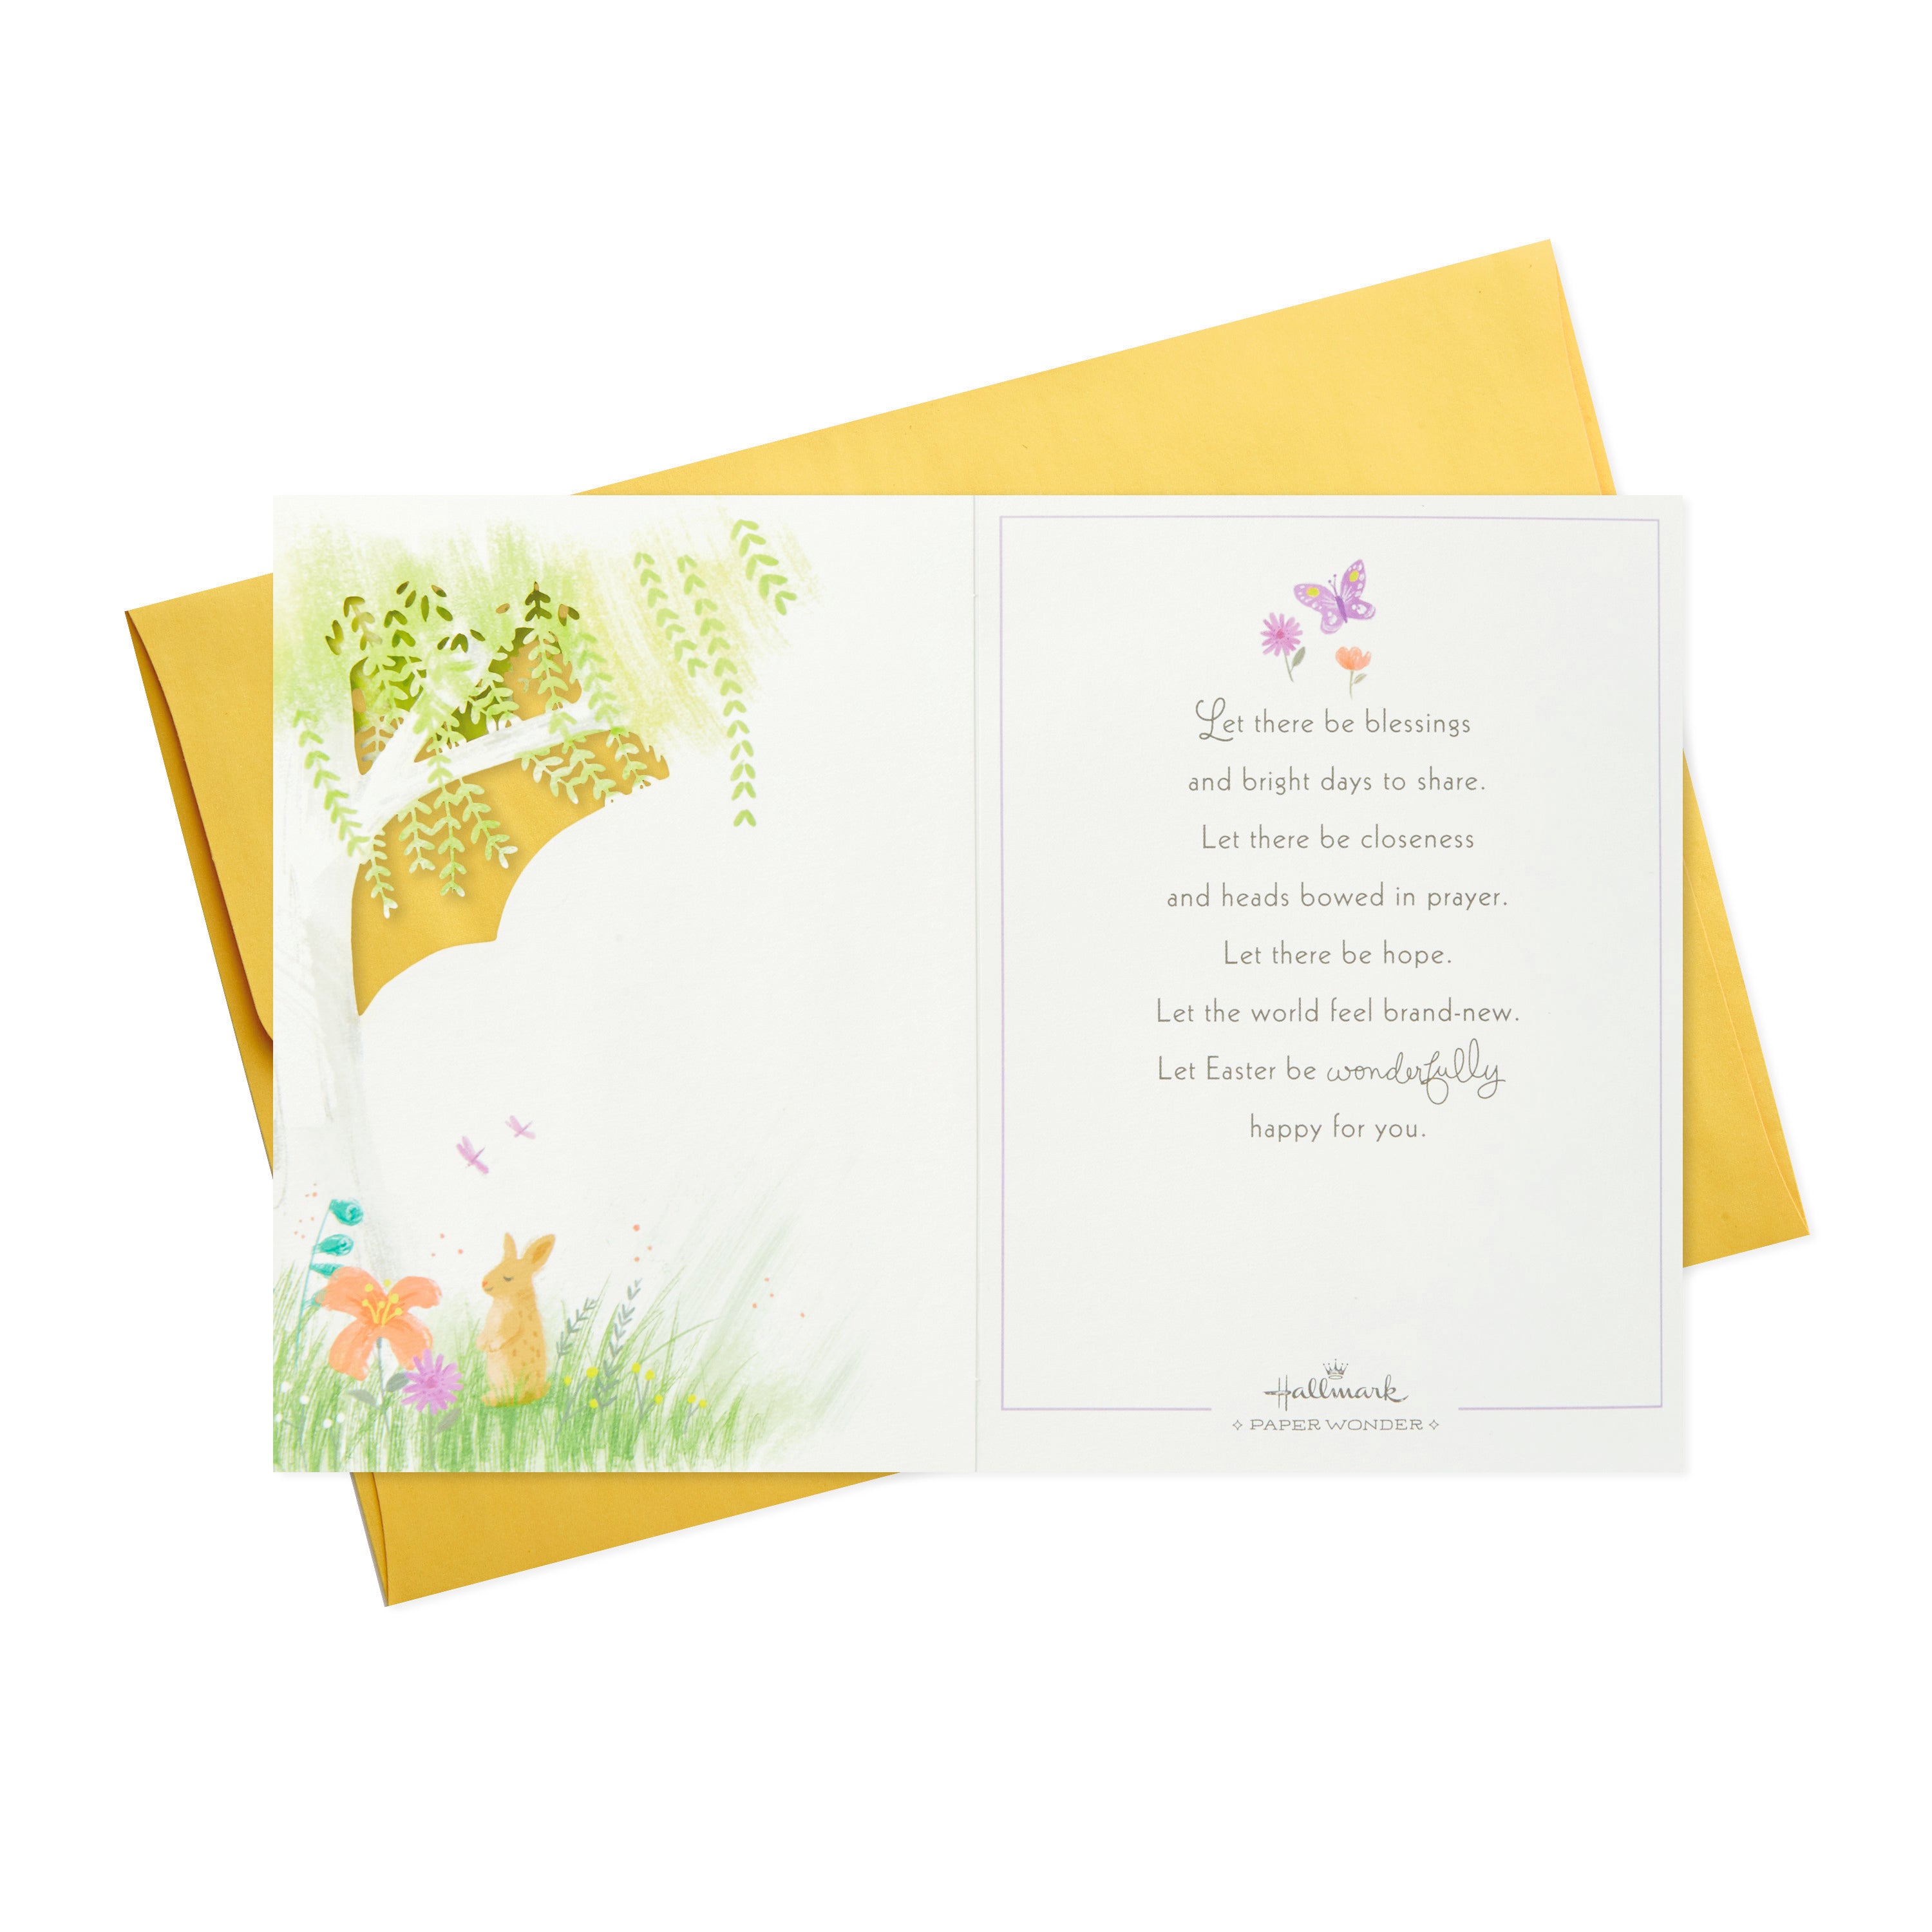 Paper Wonder Displayable Pop Up Easter Card (Blessings to You Church)